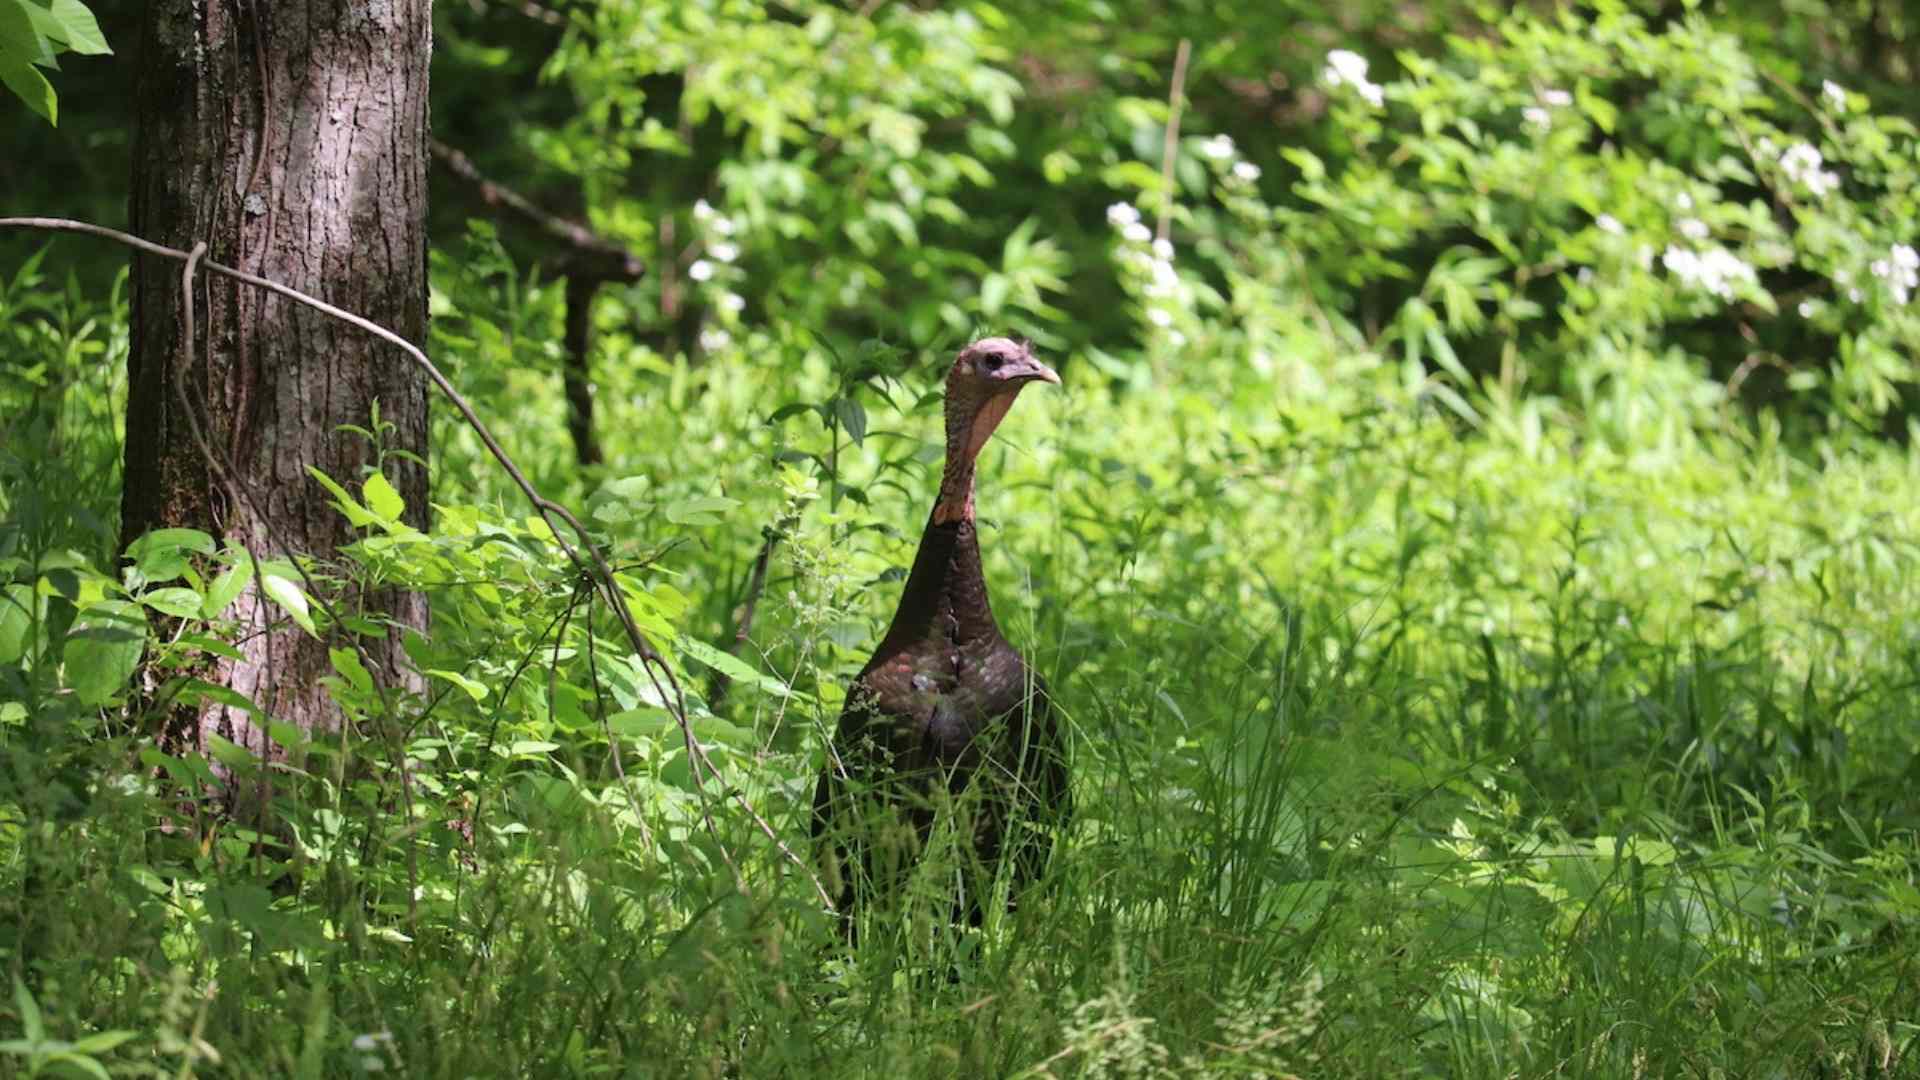 A Turkey in the meadow in the woods surrounded by greenery